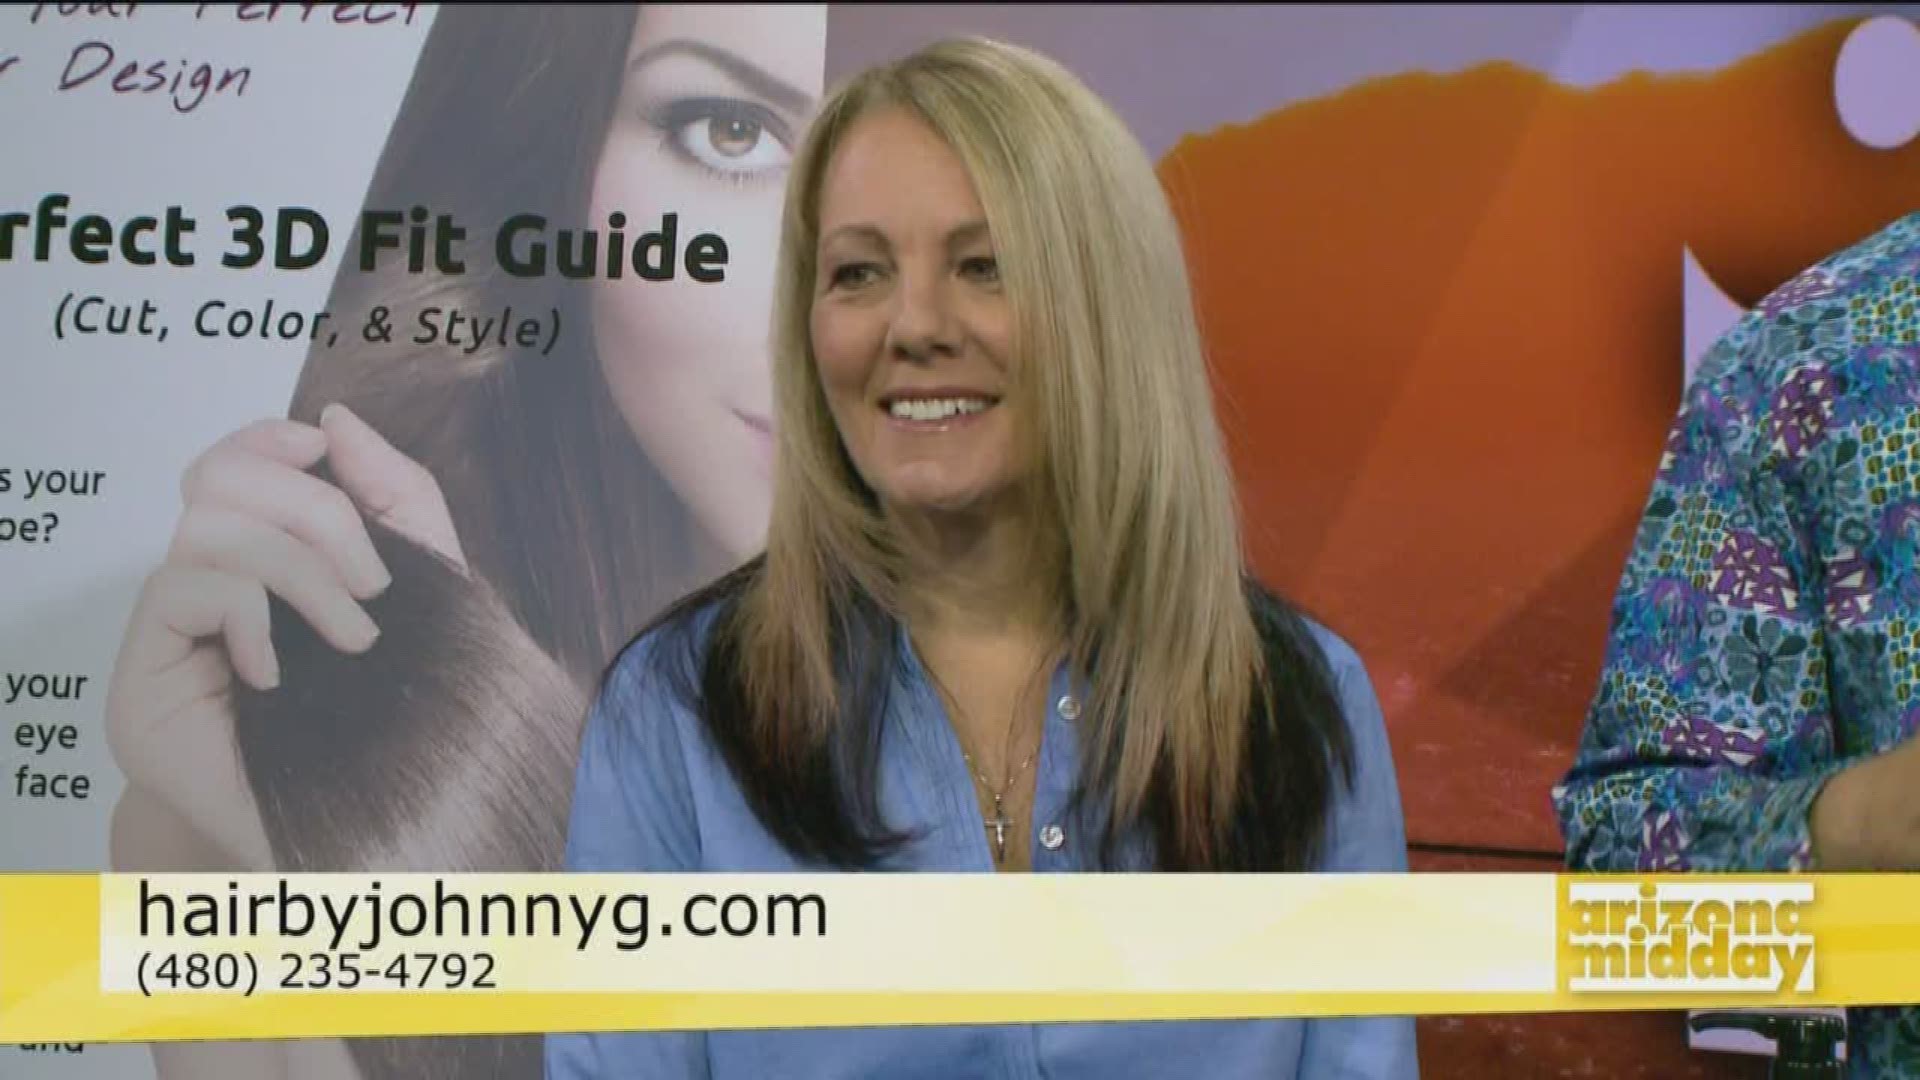 Johnny G tells us about his Perfect 3D Fit guide for nourishing your hair!